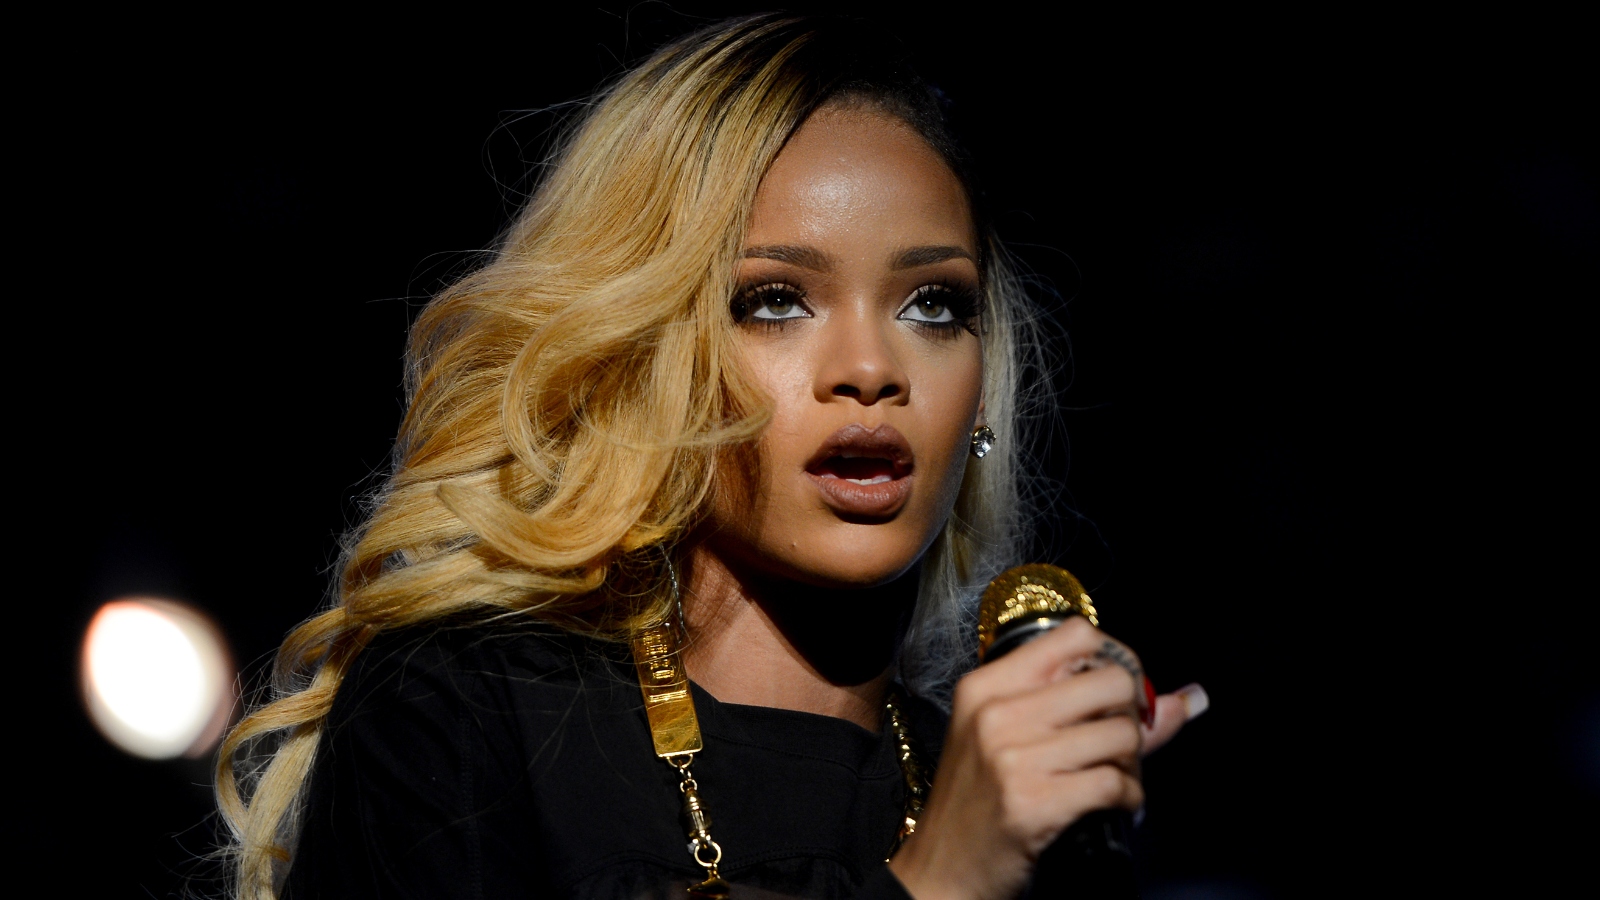 Rihanna performing with a golden microphone